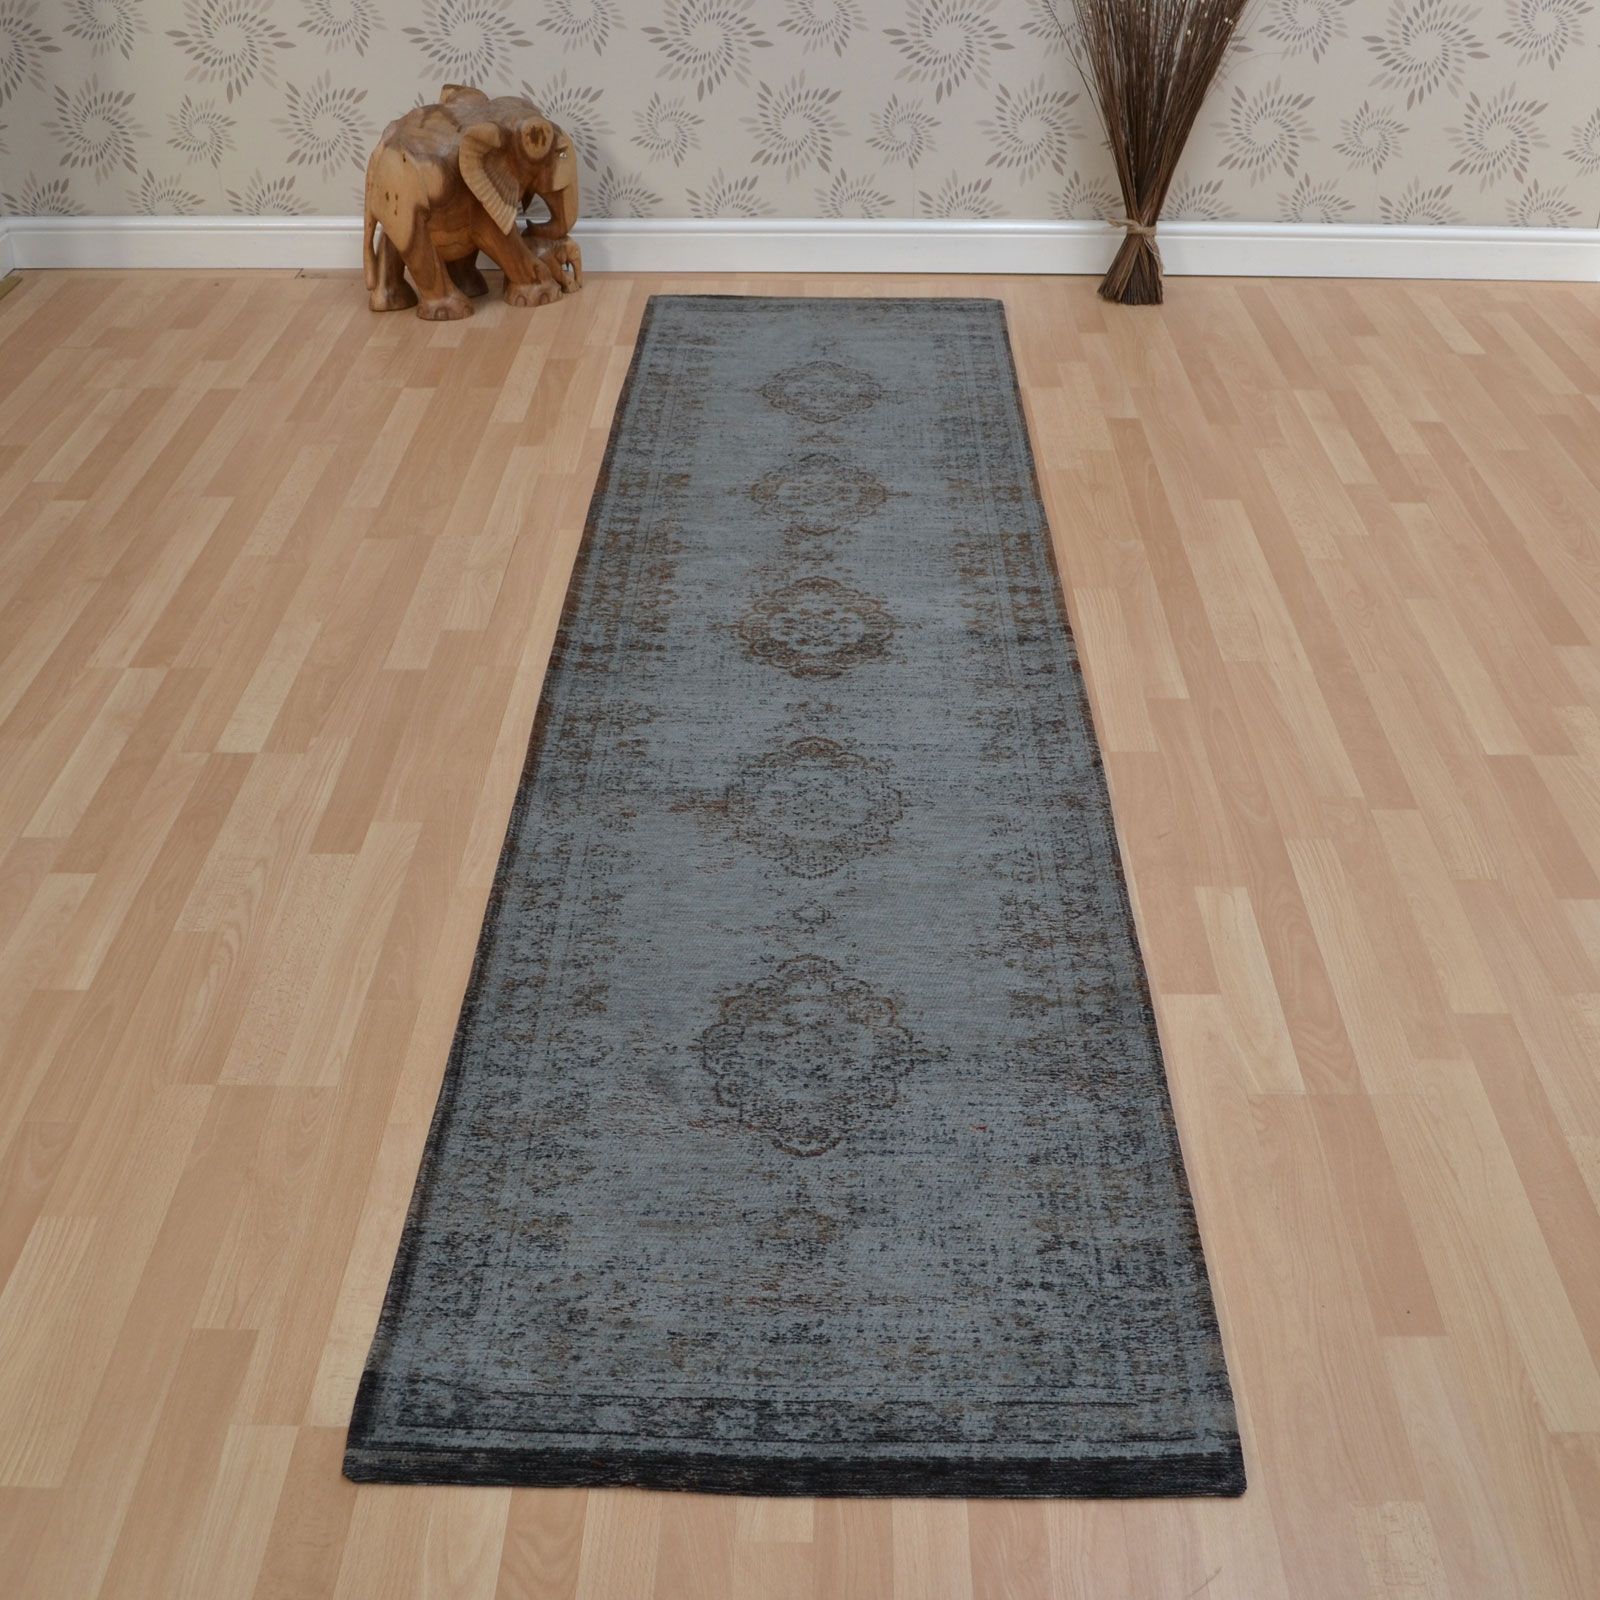 Hallway Runner Rugs Uk Pictures Home Furniture Ideas In Runner Carpets Hallway (View 8 of 20)